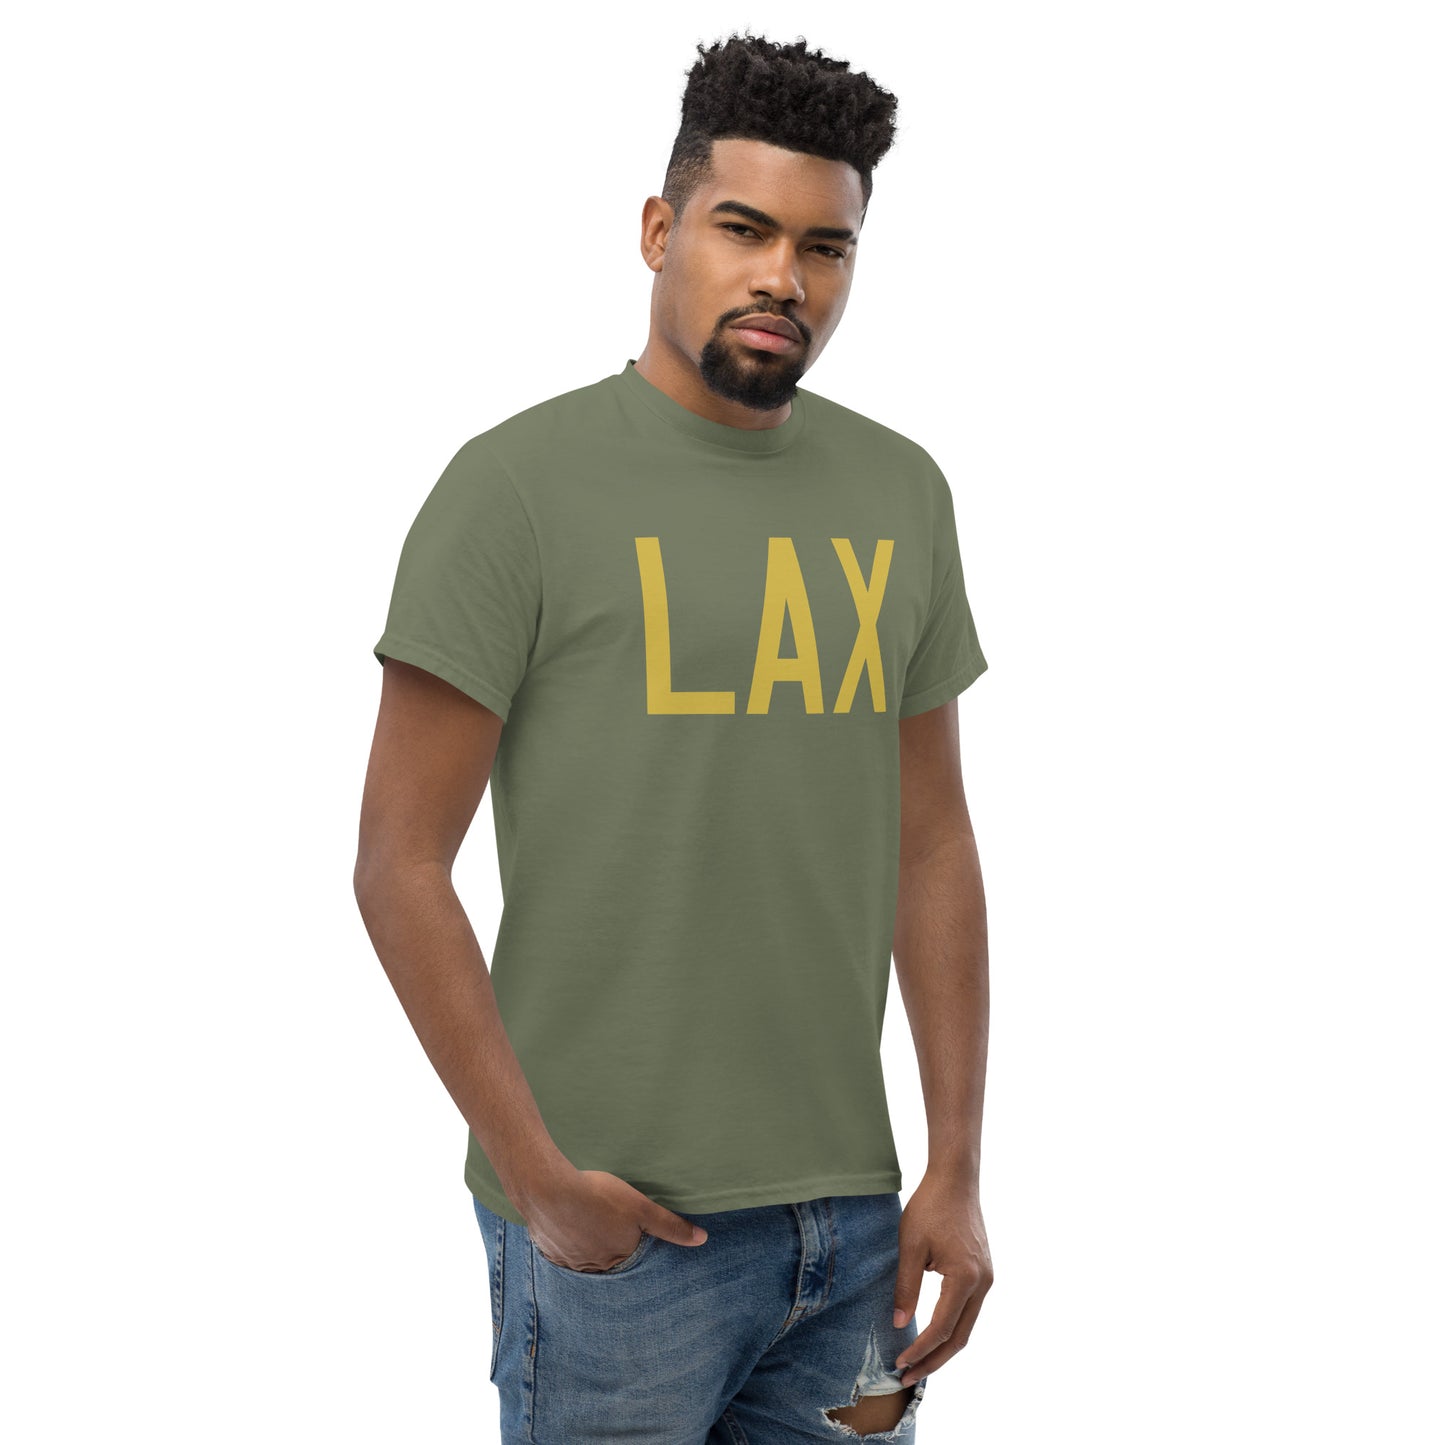 Aviation Enthusiast Men's Tee - Old Gold Graphic • LAX Los Angeles • YHM Designs - Image 08